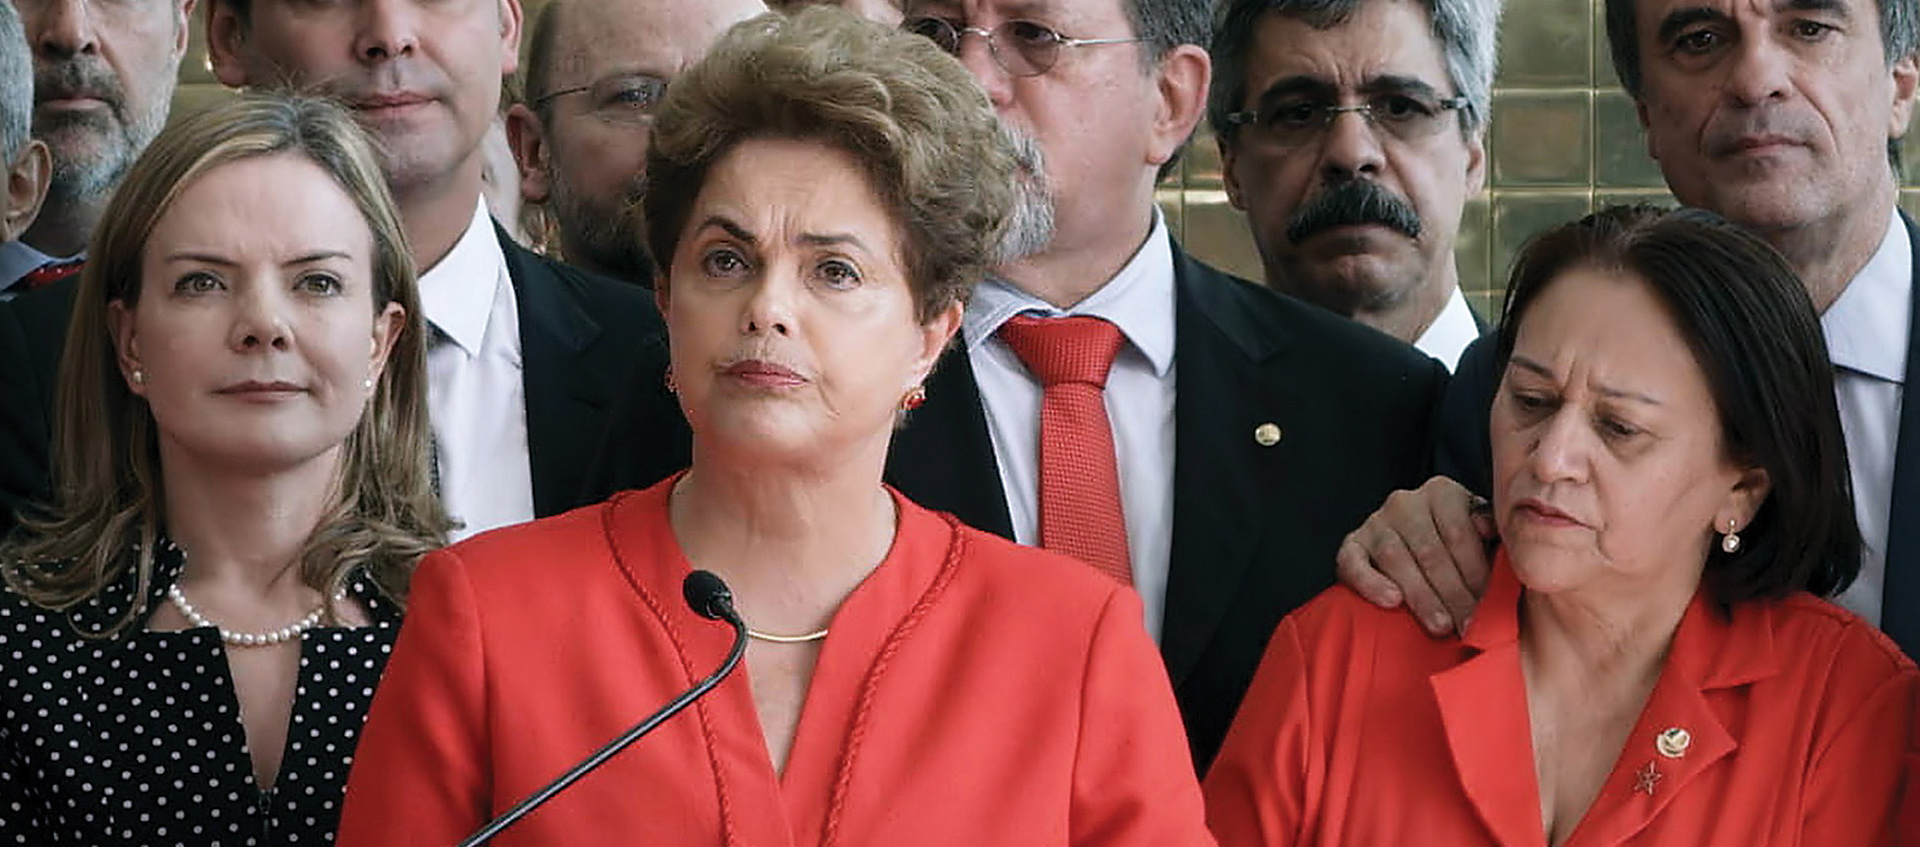 Dilma Rousseff speaks in front of crowd